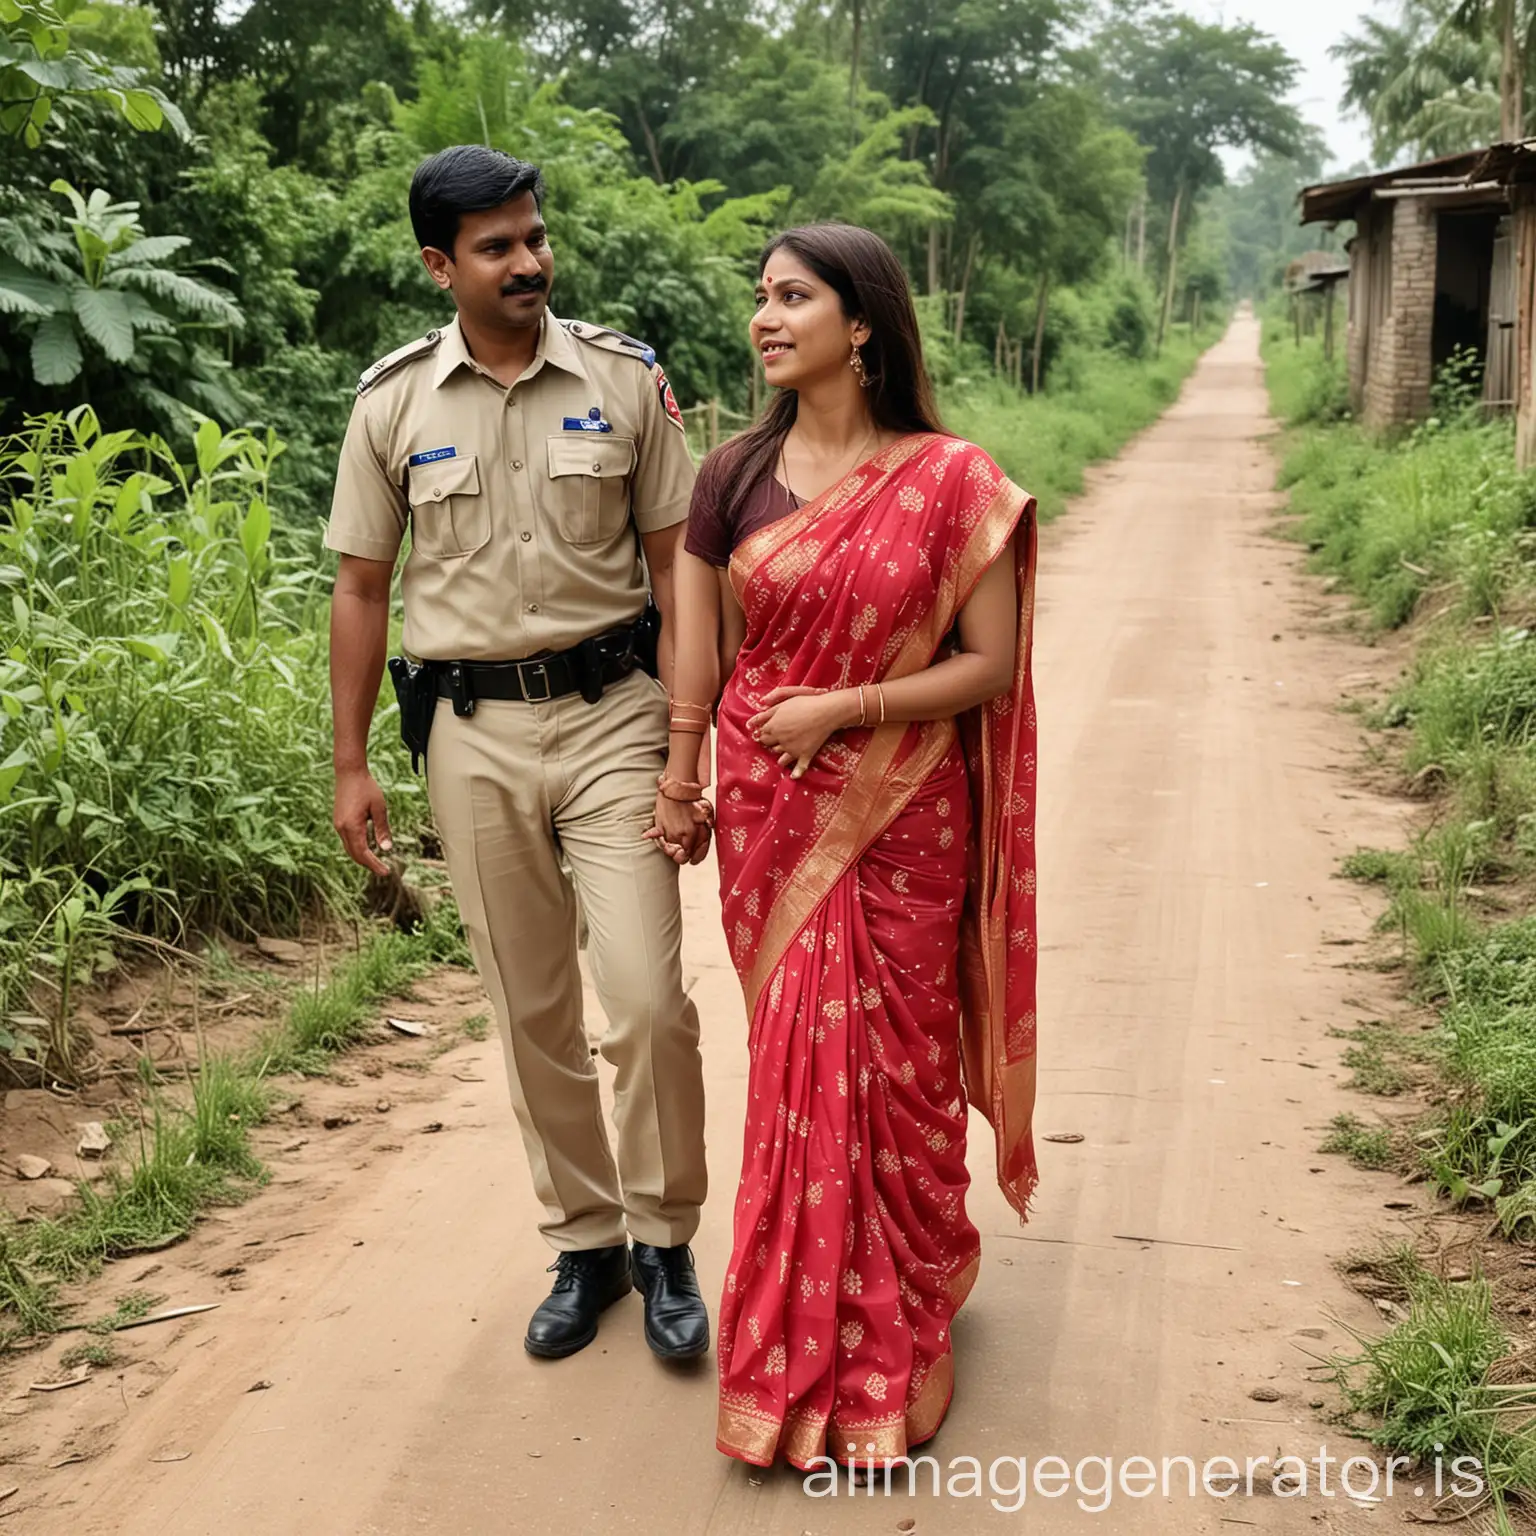 Indian-Husband-Wearing-Saree-Walking-in-Village-with-Wife-in-Police-Uniform